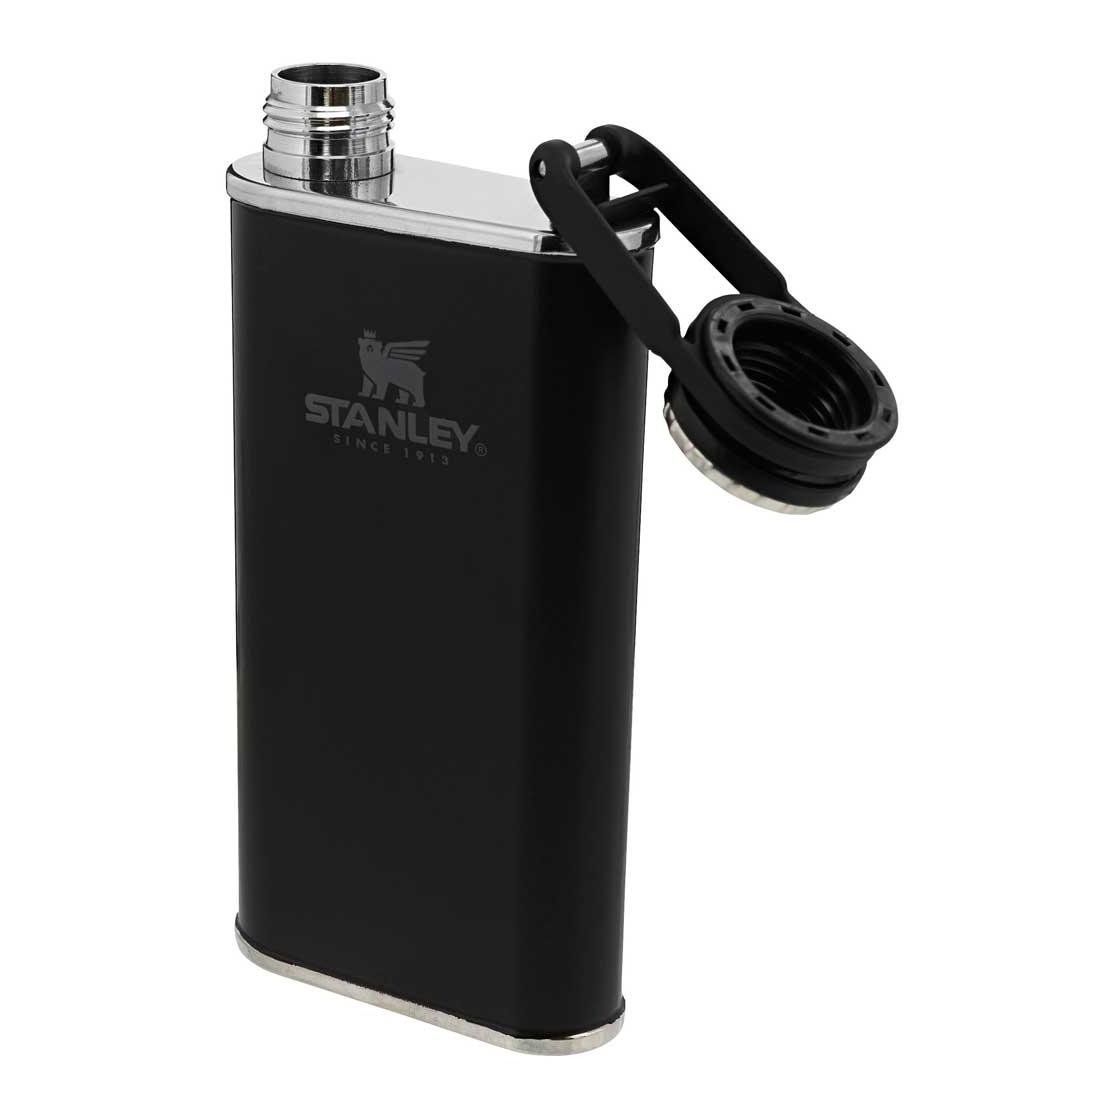 CLASSIC WIDE MOUTH FLASK 236 ml